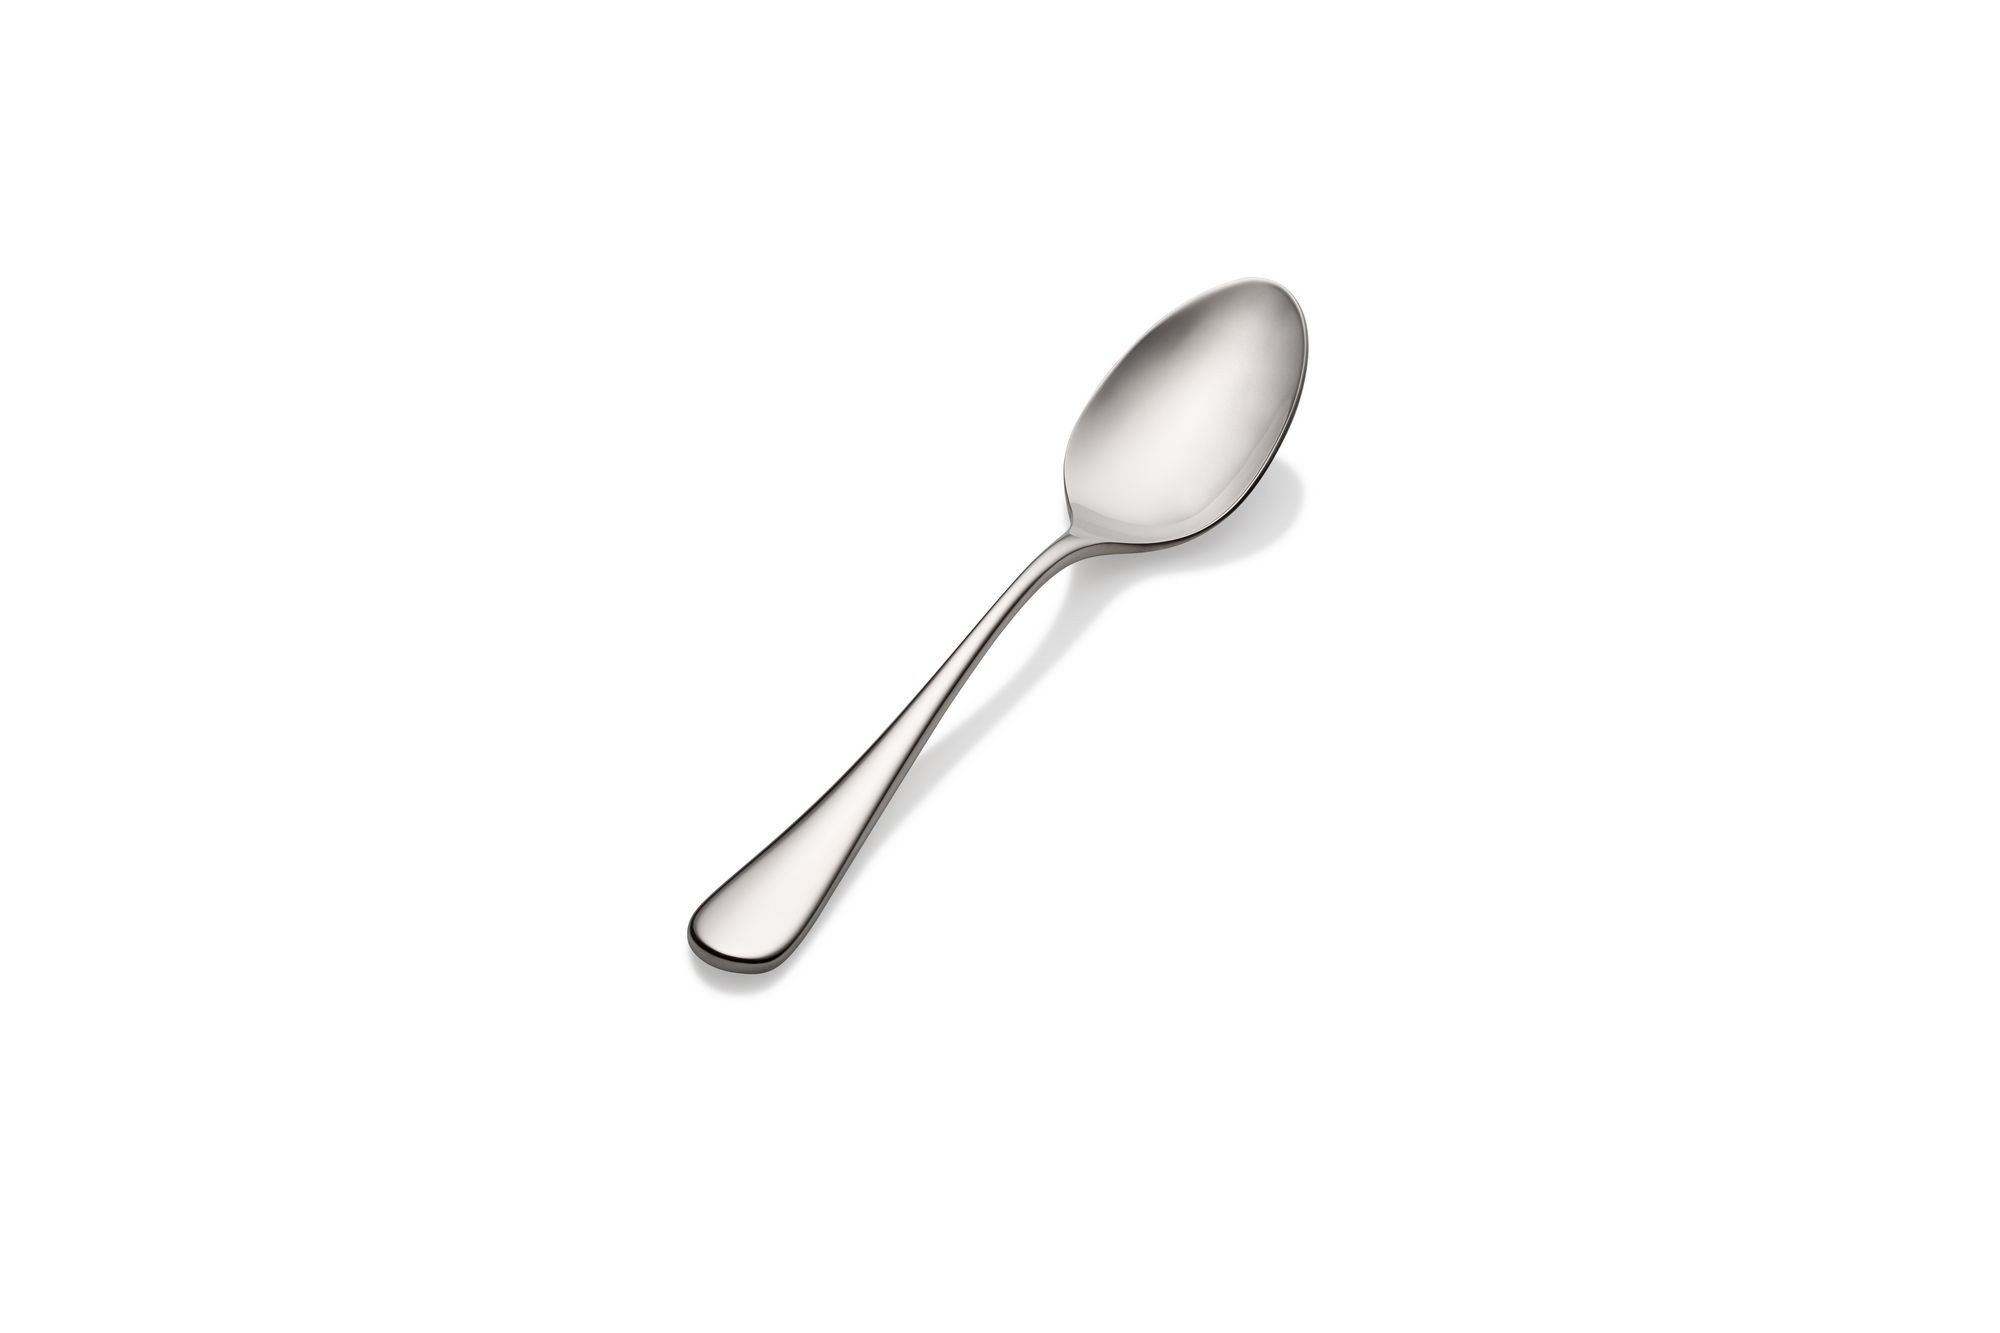 Bon Chef S4003 Como 18/8 Stainless Steel Soup and Dessert Spoon